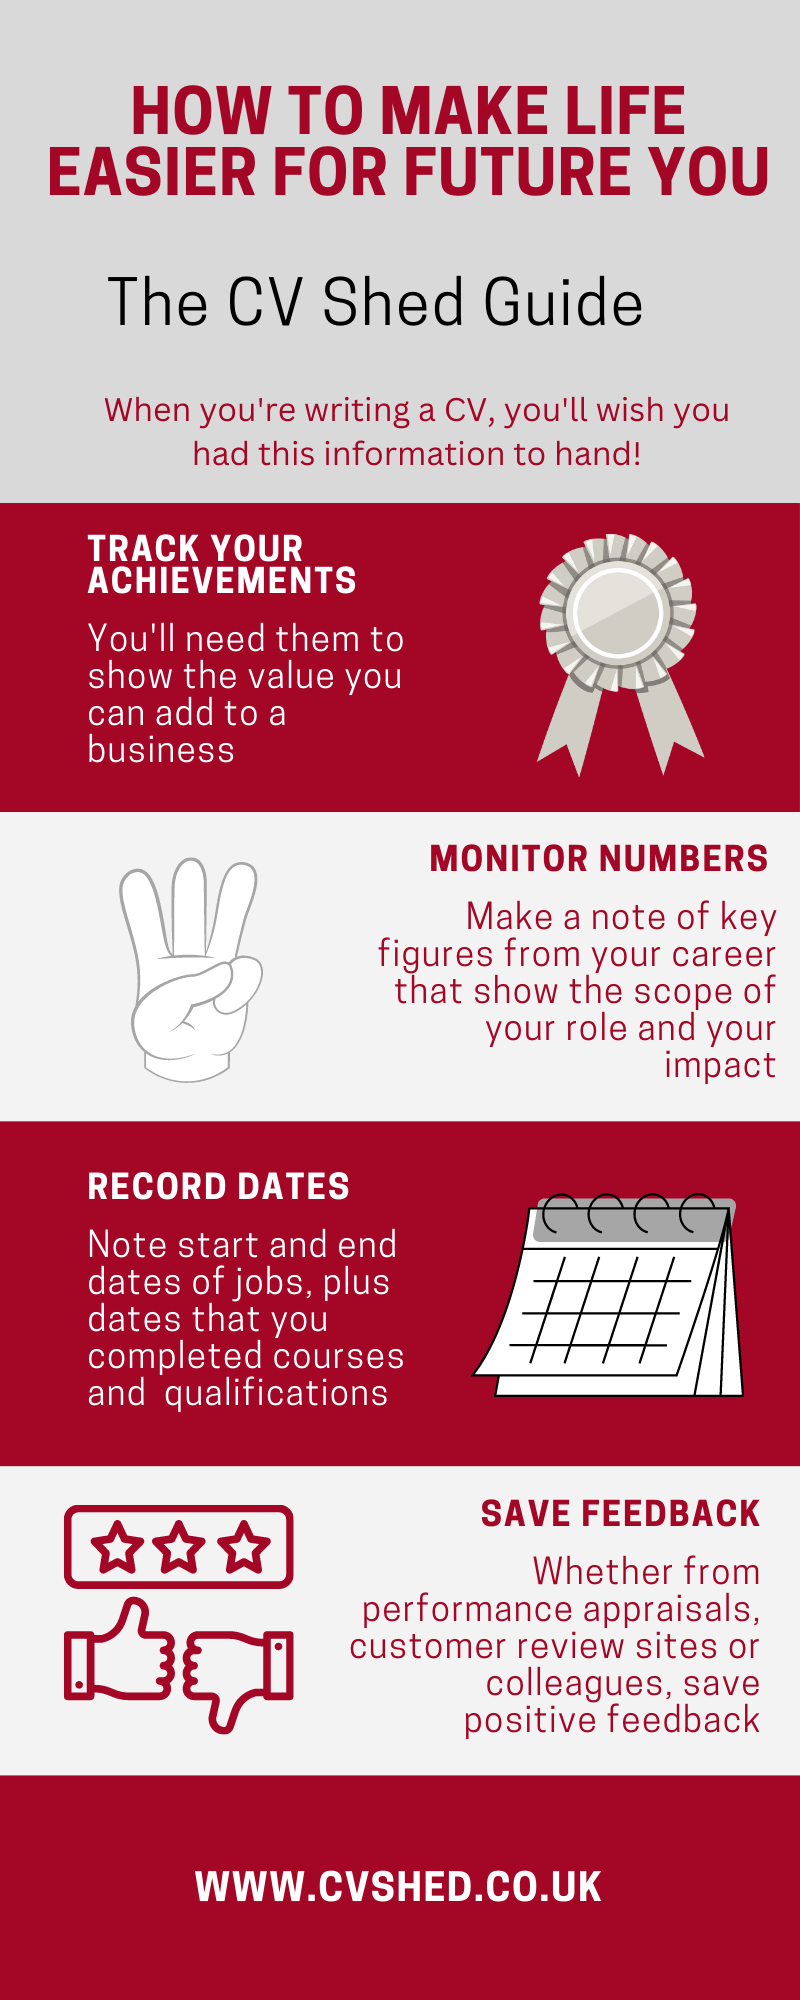 Infographic - track achievements, monitor numbers, record dates, save feedback